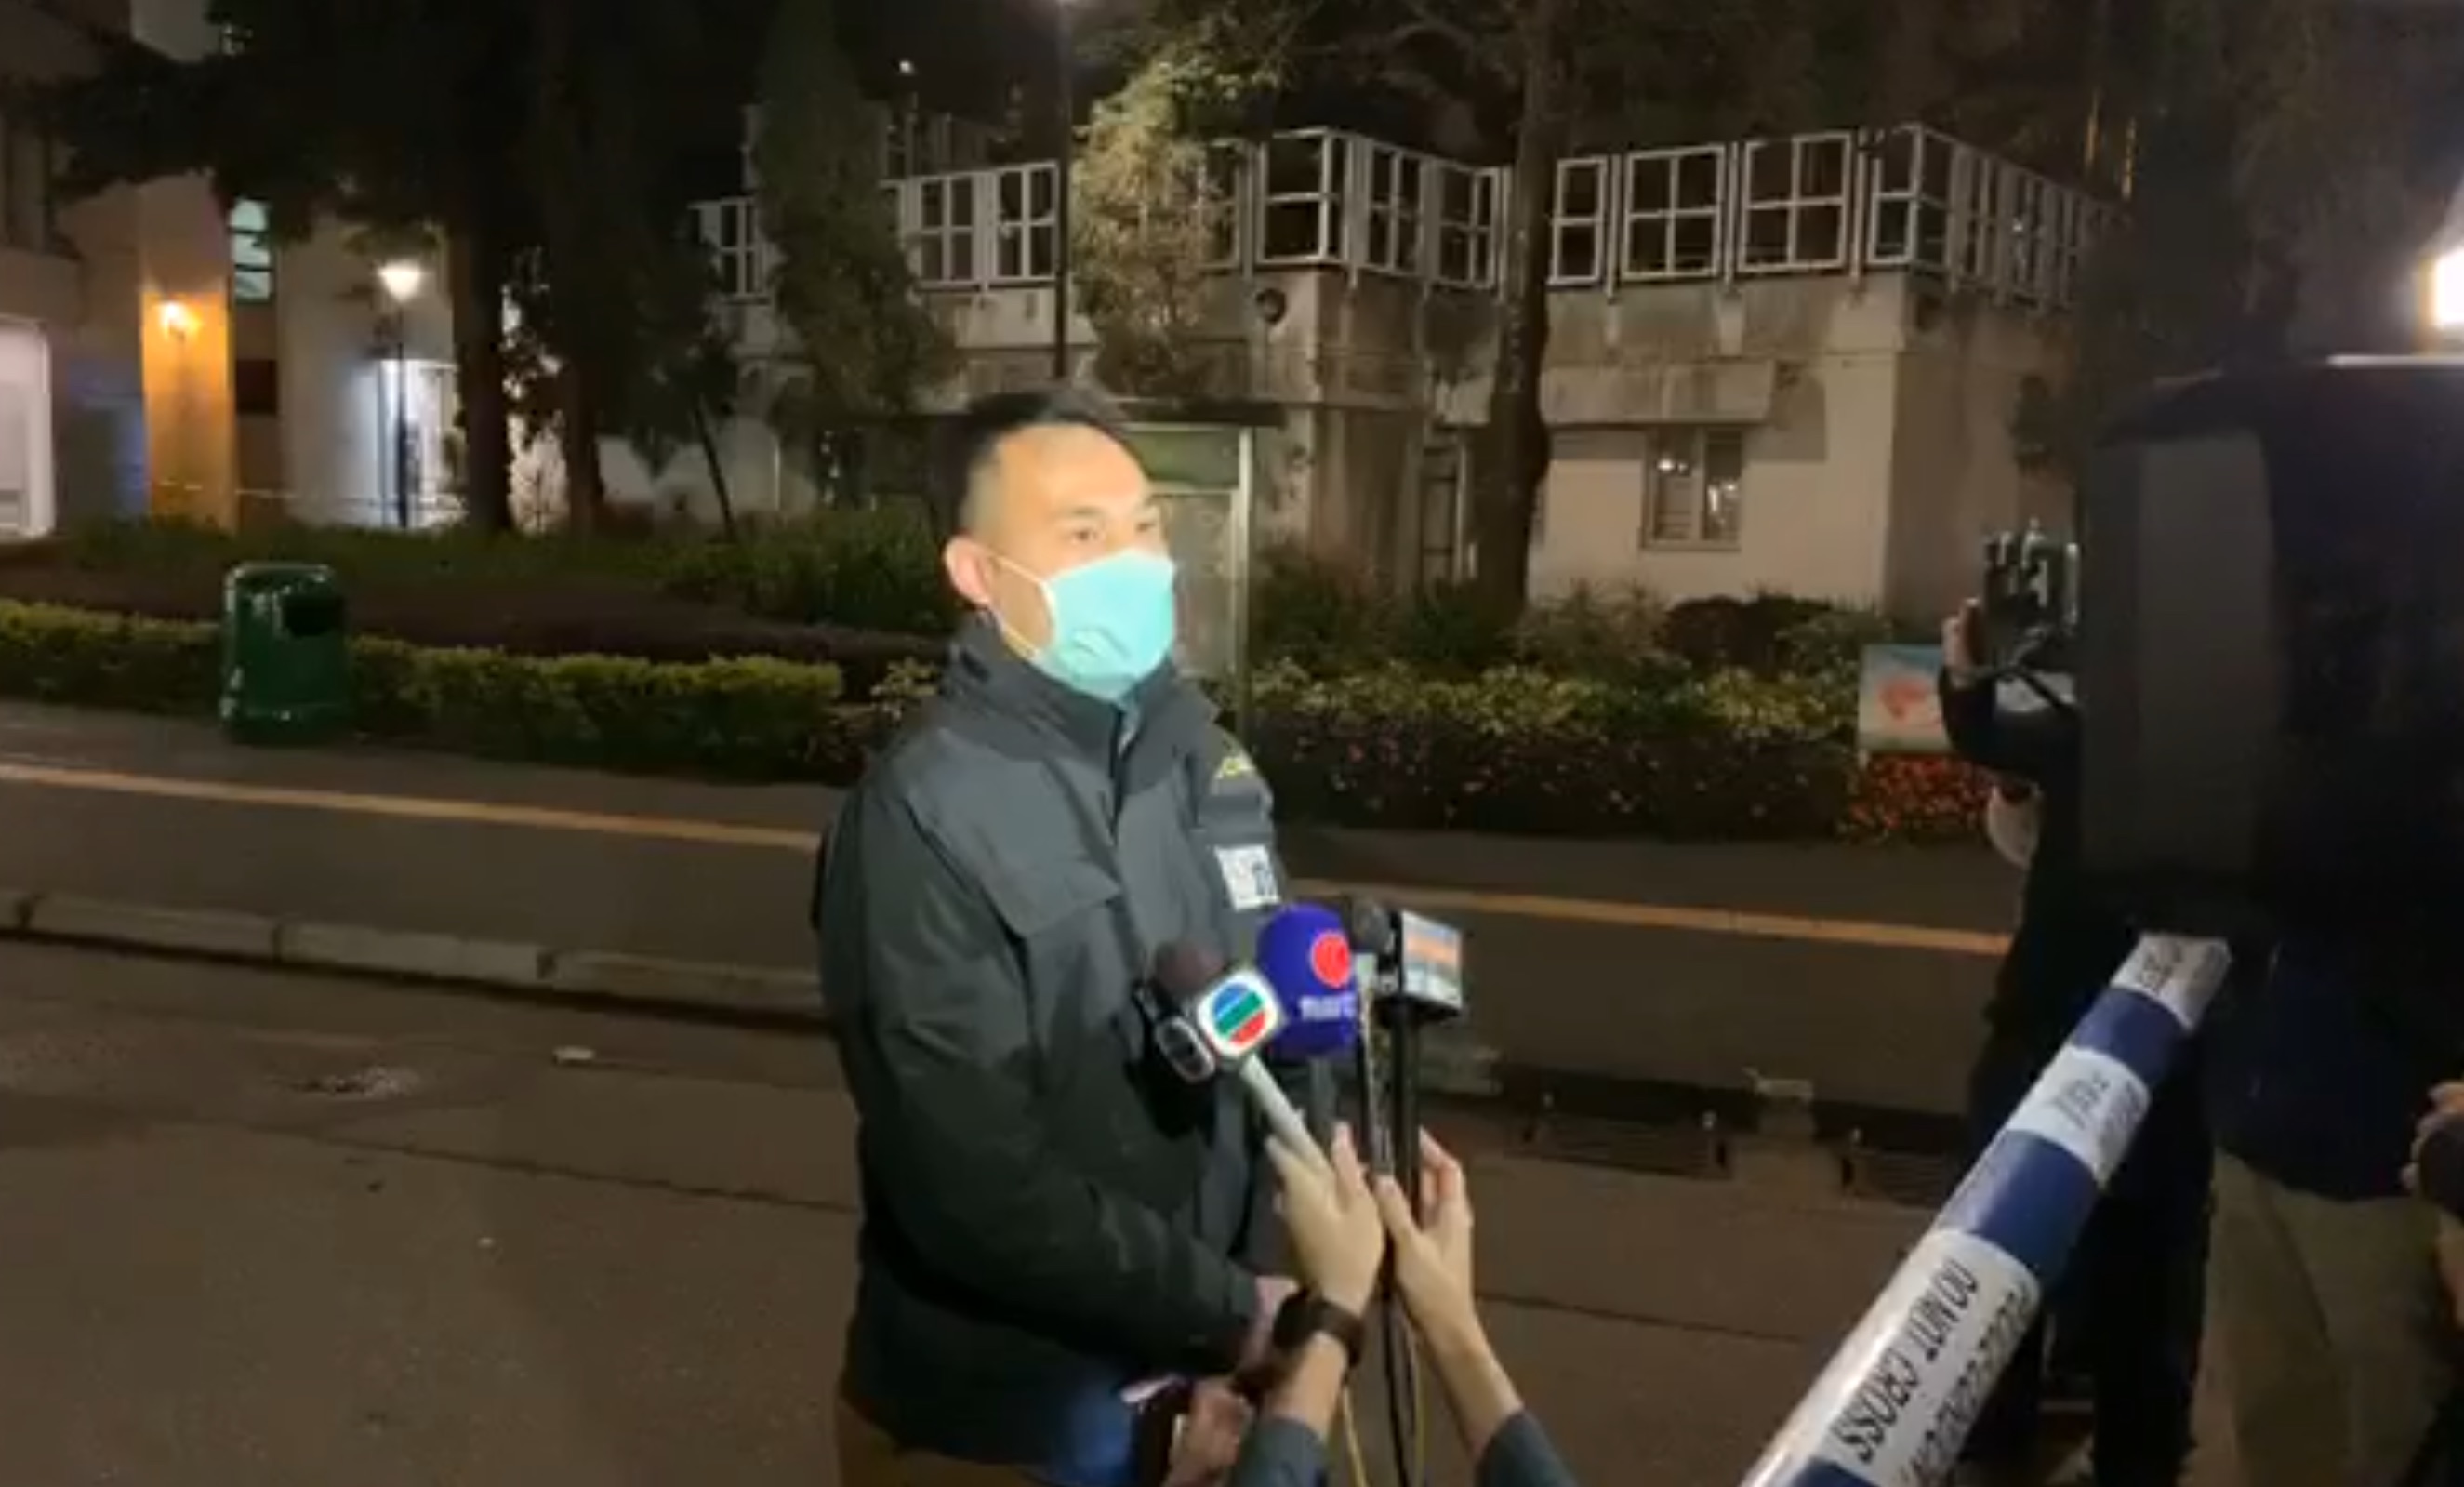 Authorities address the media about a bomb that was detonated in a library bathroom in Lai Chi Kok last night. Screengrab via Facebook.